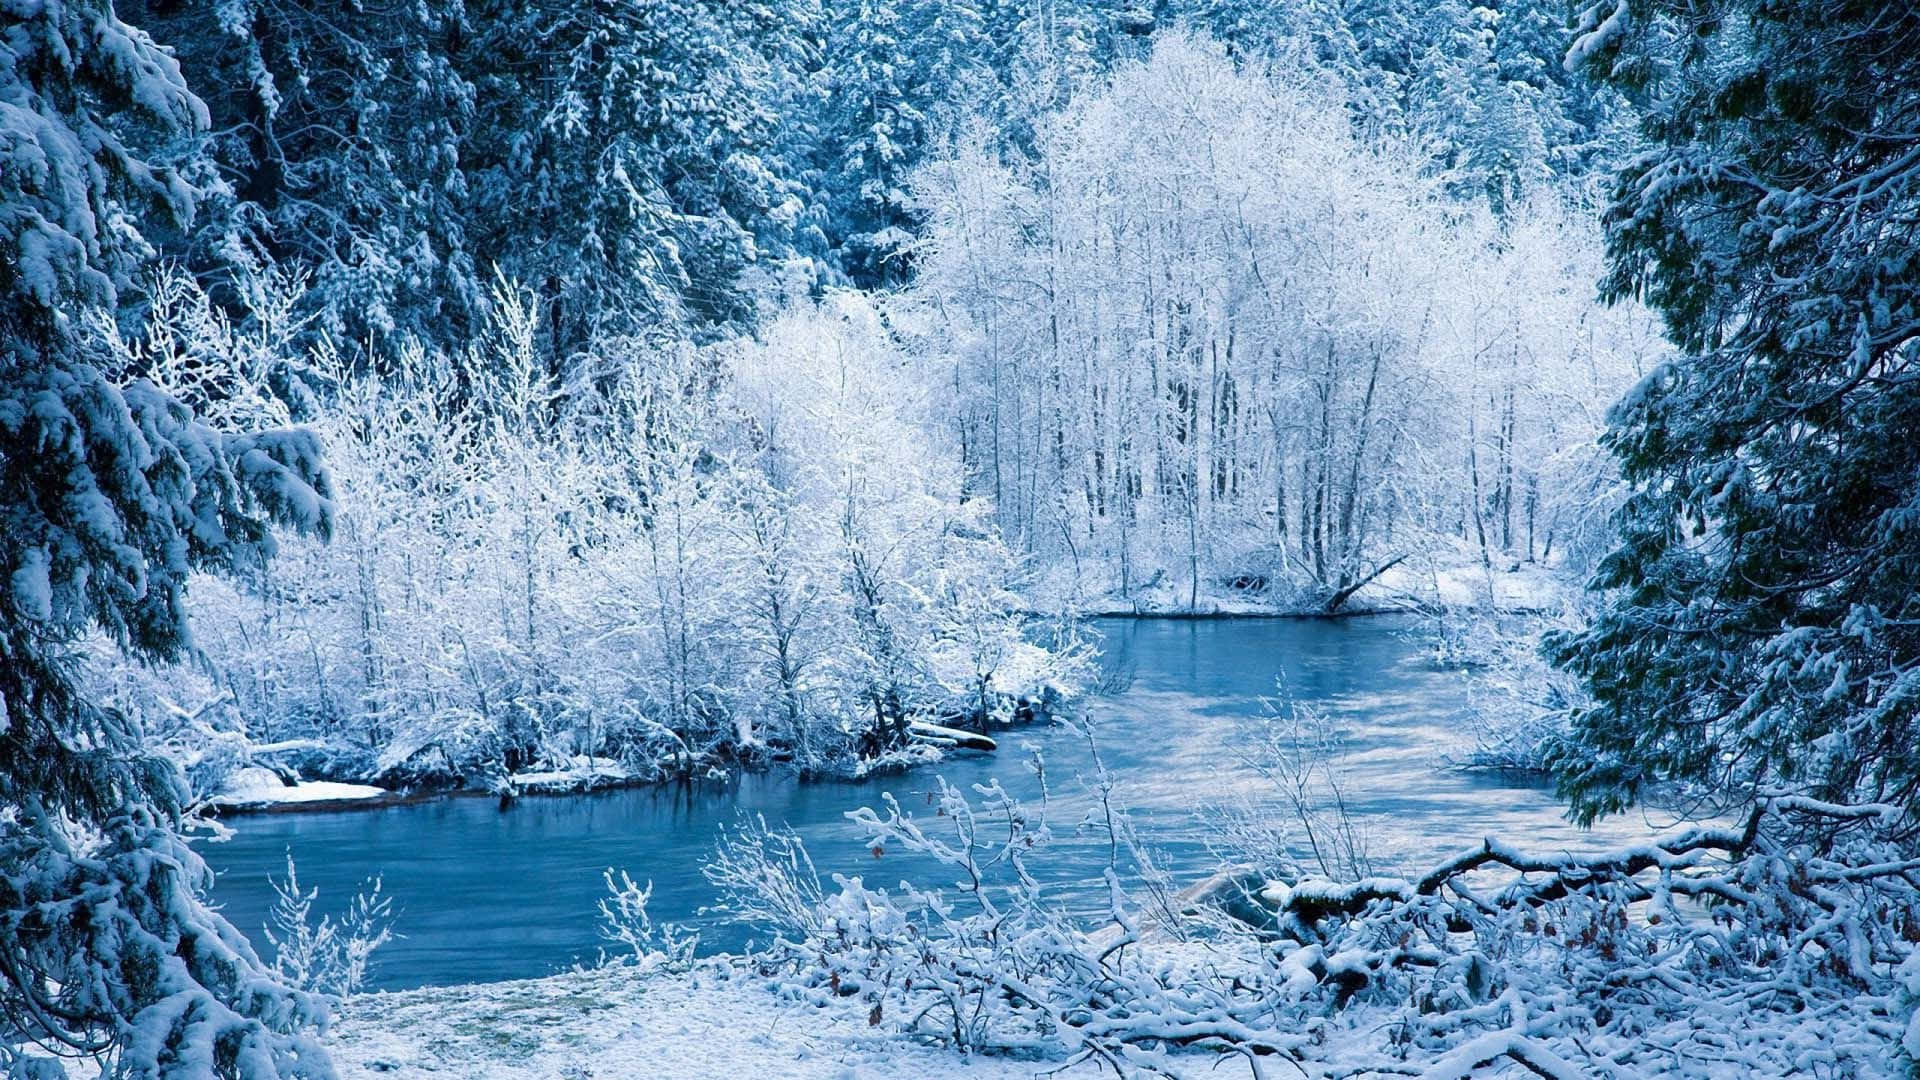 Enjoy the beauty of Winter in the comfort of your home Wallpaper